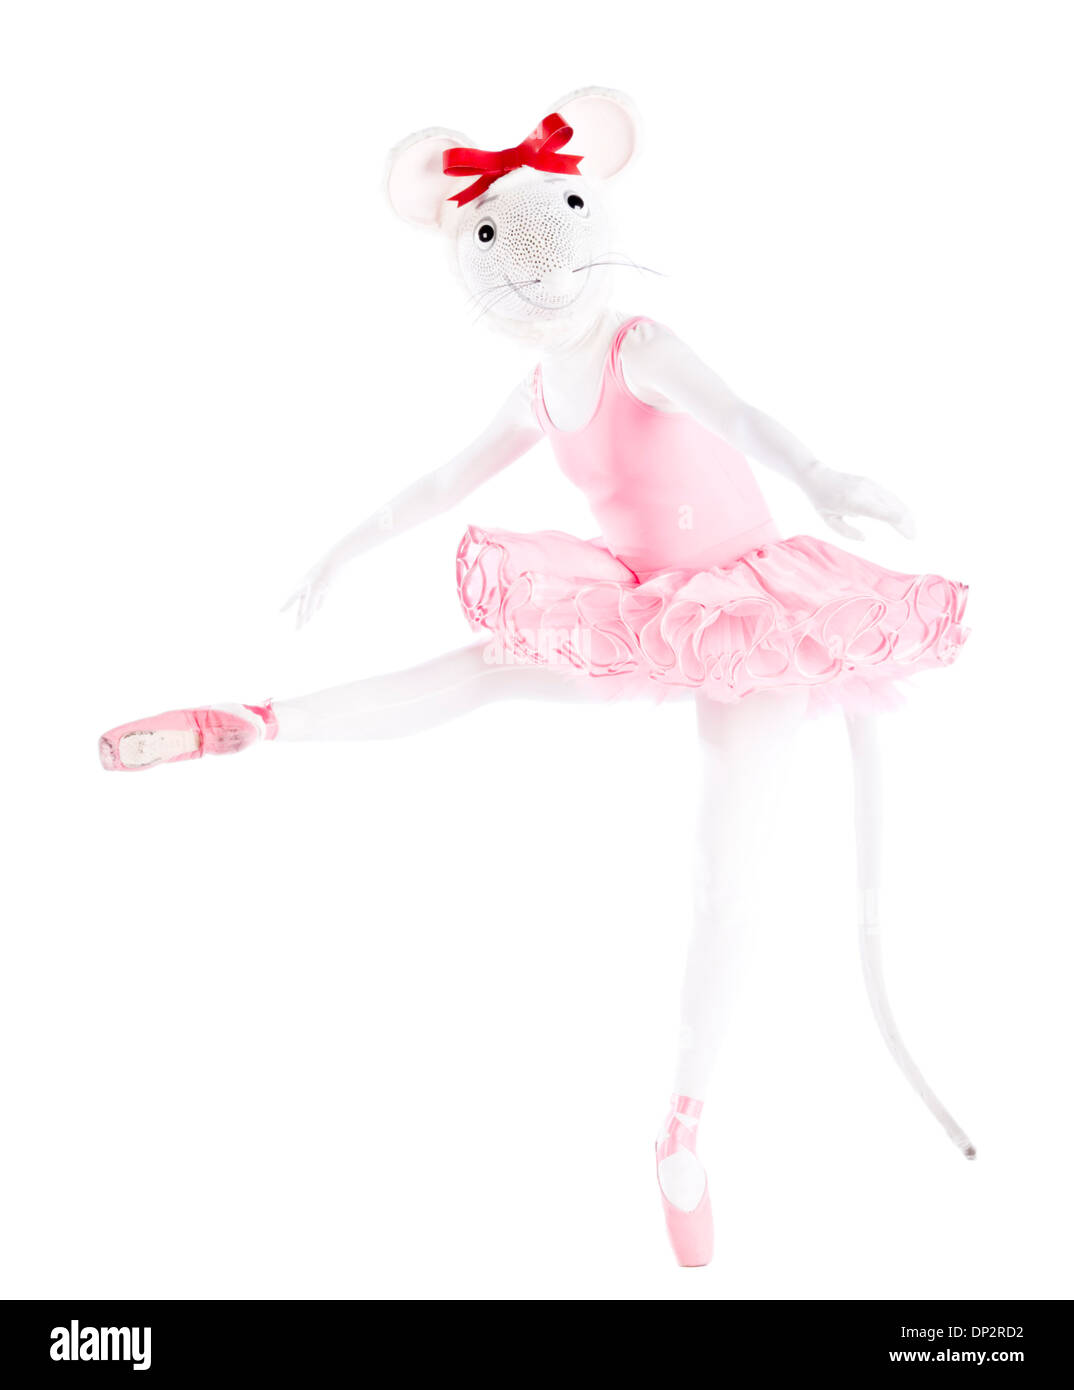 Angelina Ballerina en pointe looking into the camera photographed in the studio. Stock Photo